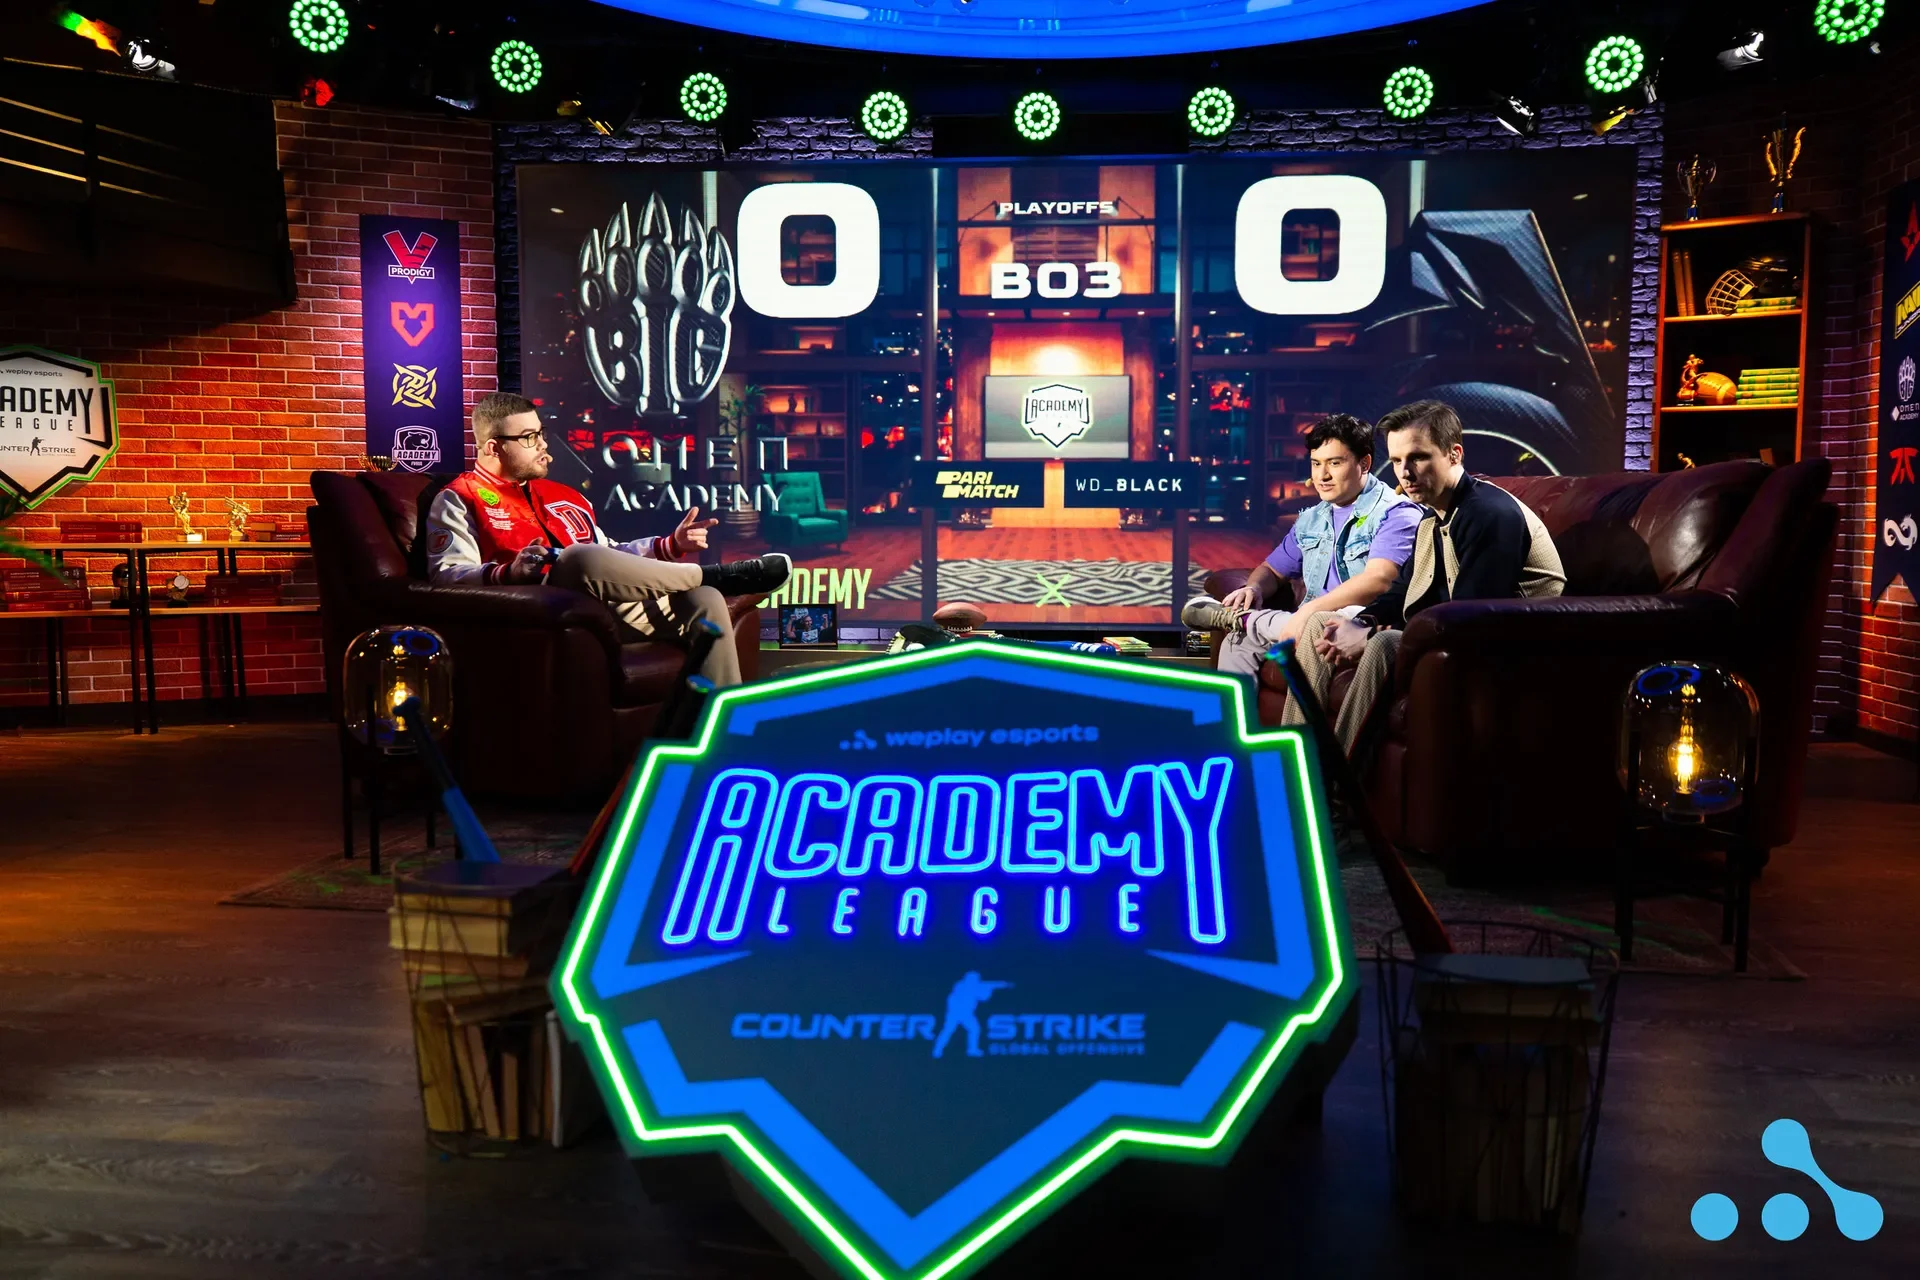 Broadcasting Studio of WePlay Academy League. Credit: WePlay Holding